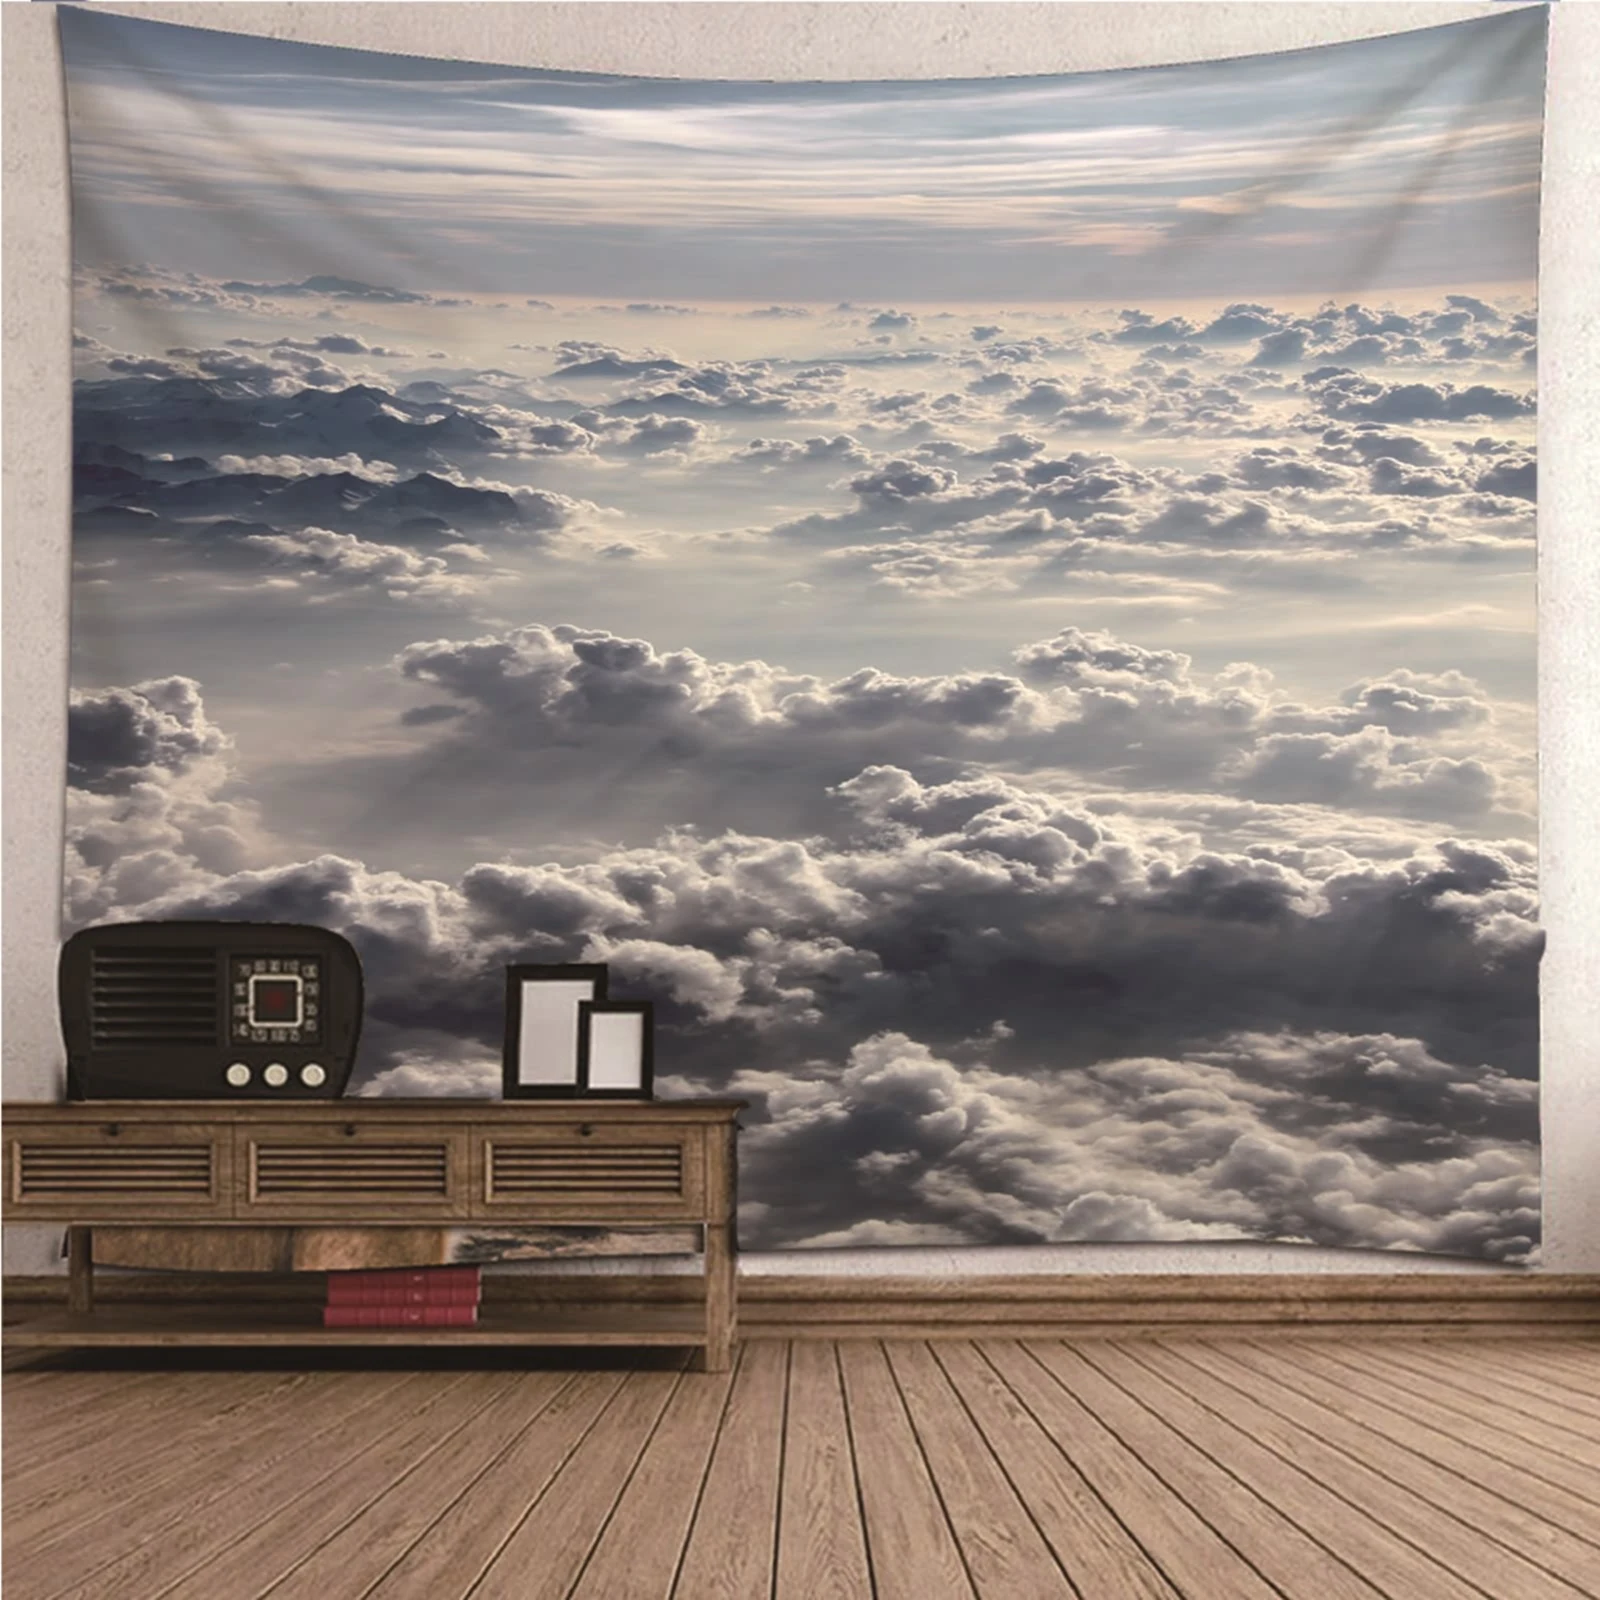 

Home Decor Room Colorful Tapestry Cheap natural scenery Clouds Wall Hanging Blanket Dorm Art Decor Covering